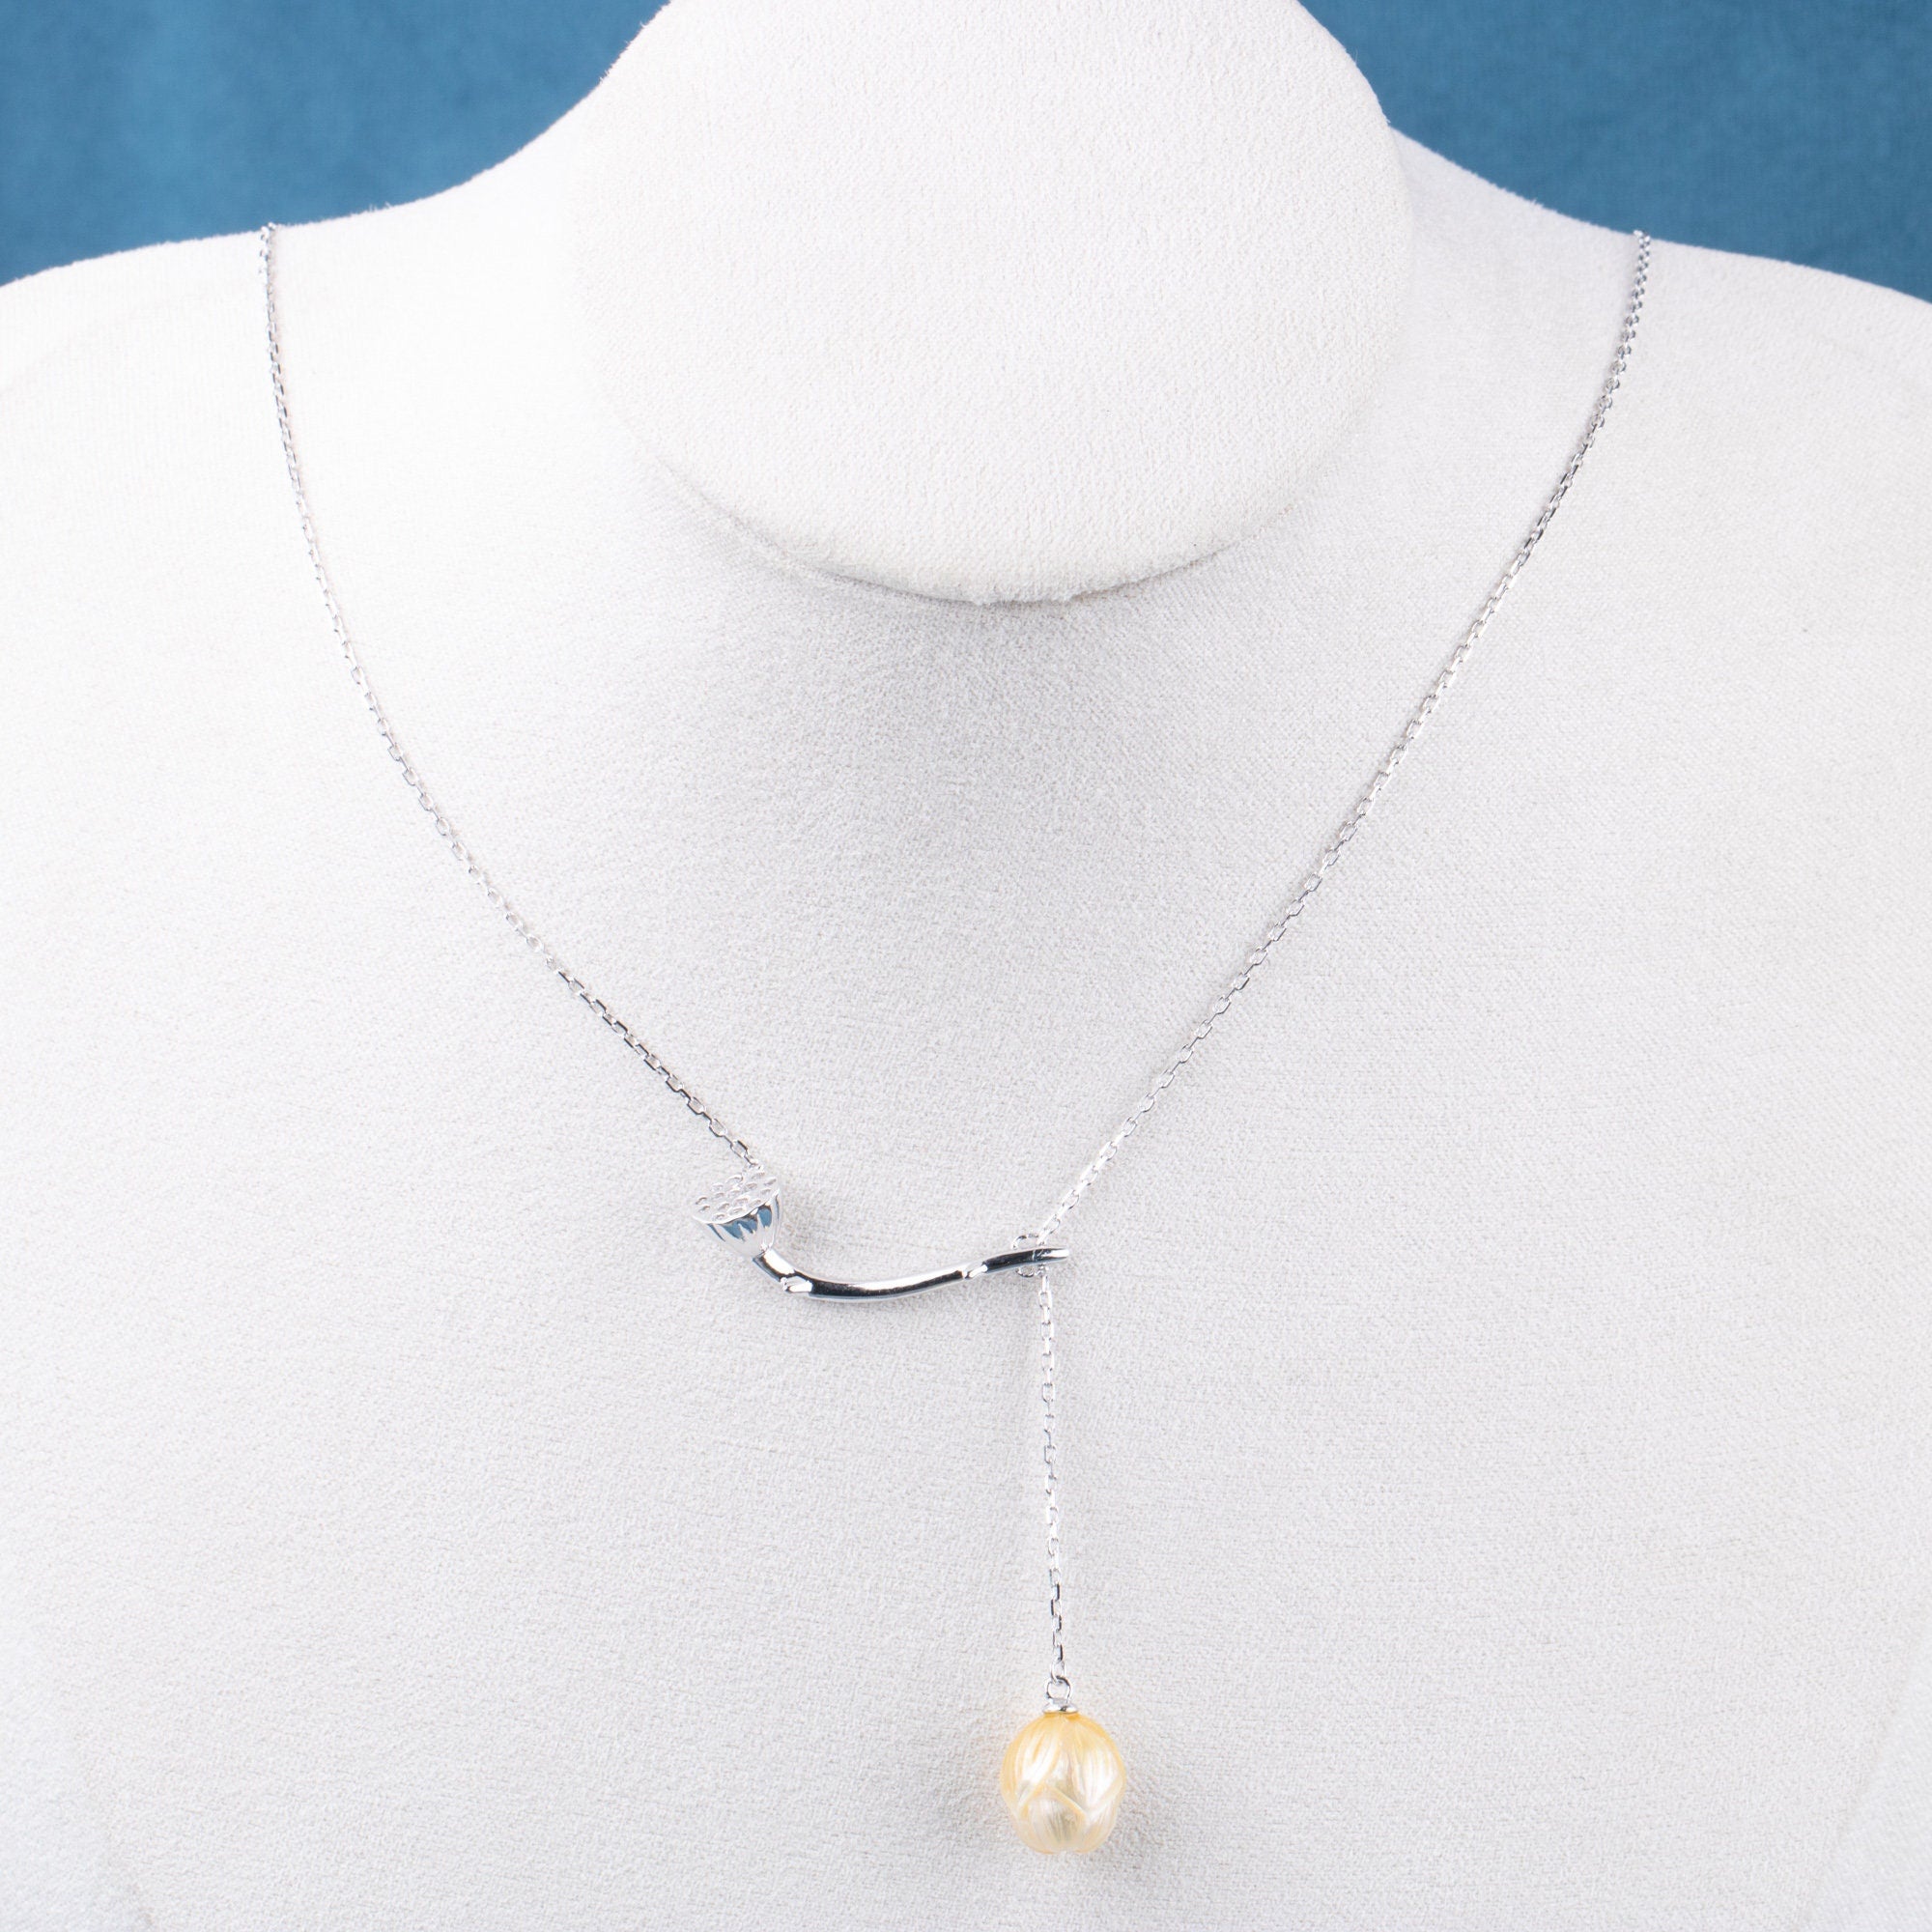 pearl carved necklace lotus shape southsea gold pear sterling silver necklace bridal gift for wedding